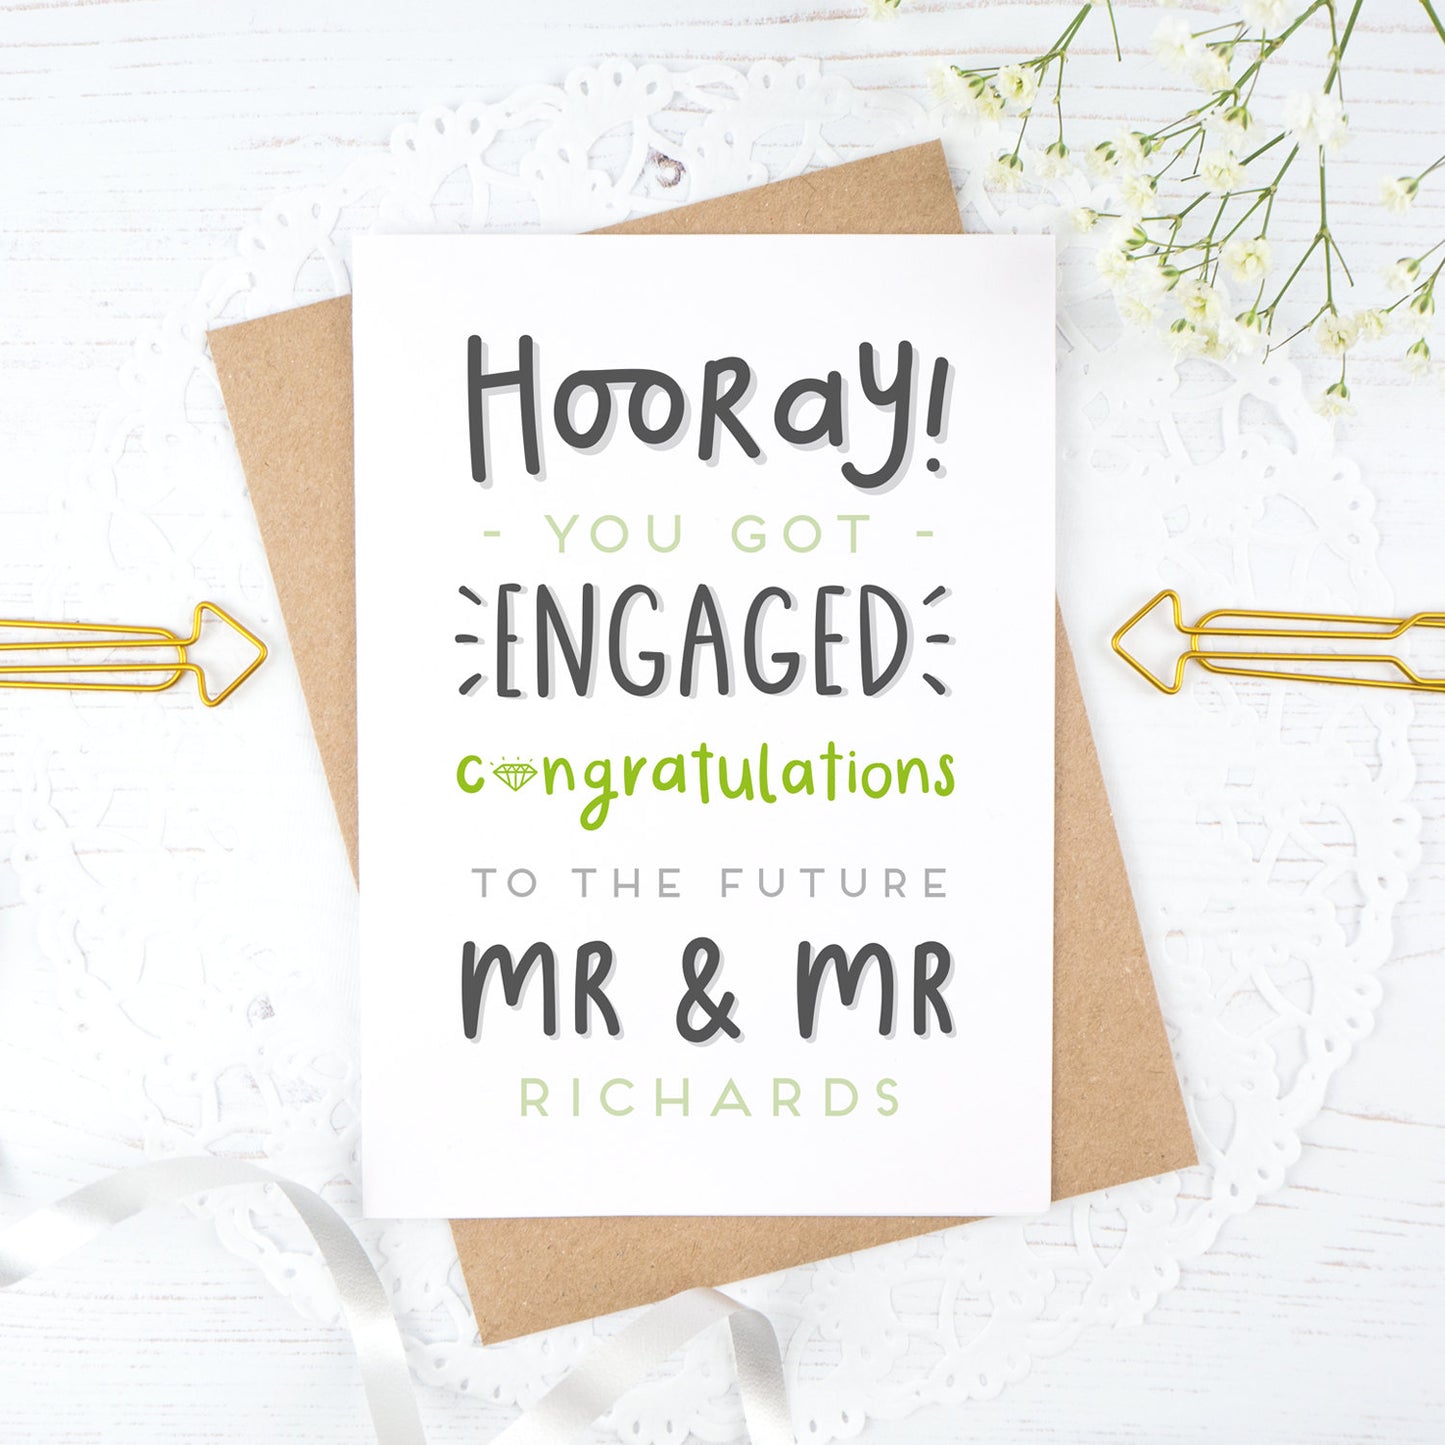 Hooray you got engaged! - Personalised Mr & Mr engagement card in green